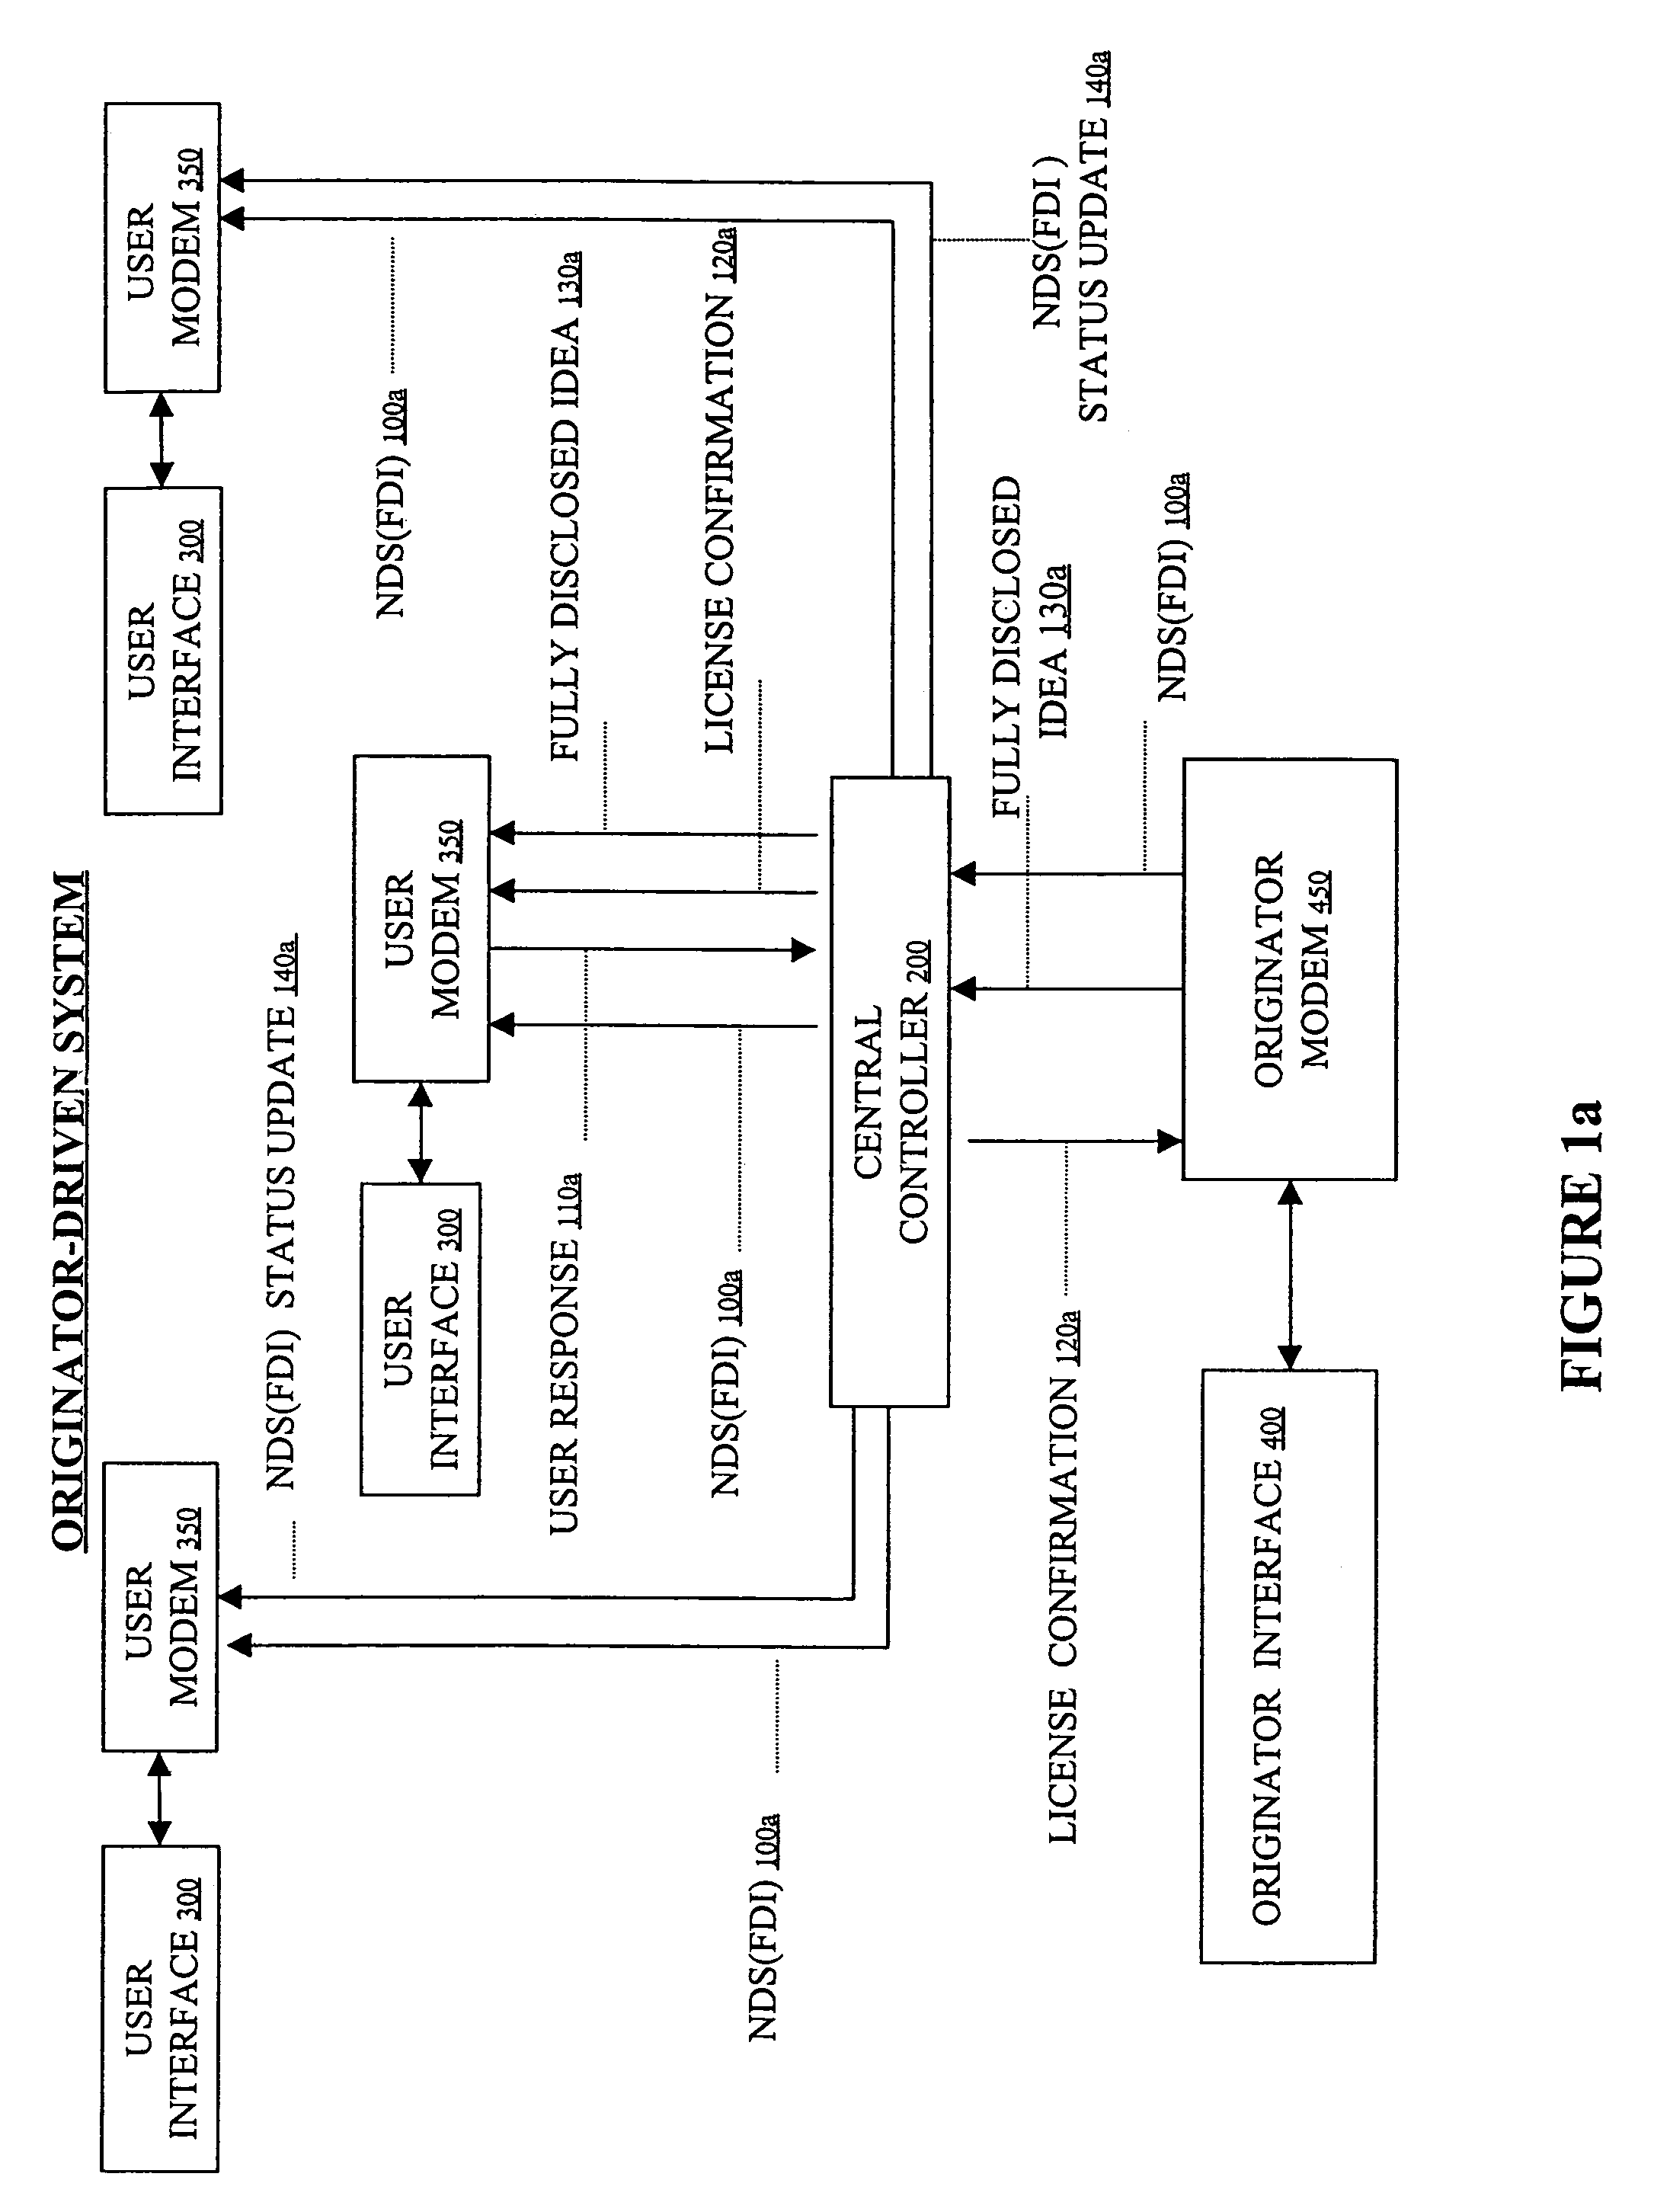 Method and apparatus for a cryptographically assisted commercial network system designed to facilitate idea submission, purchase and licensing and innovation transfer